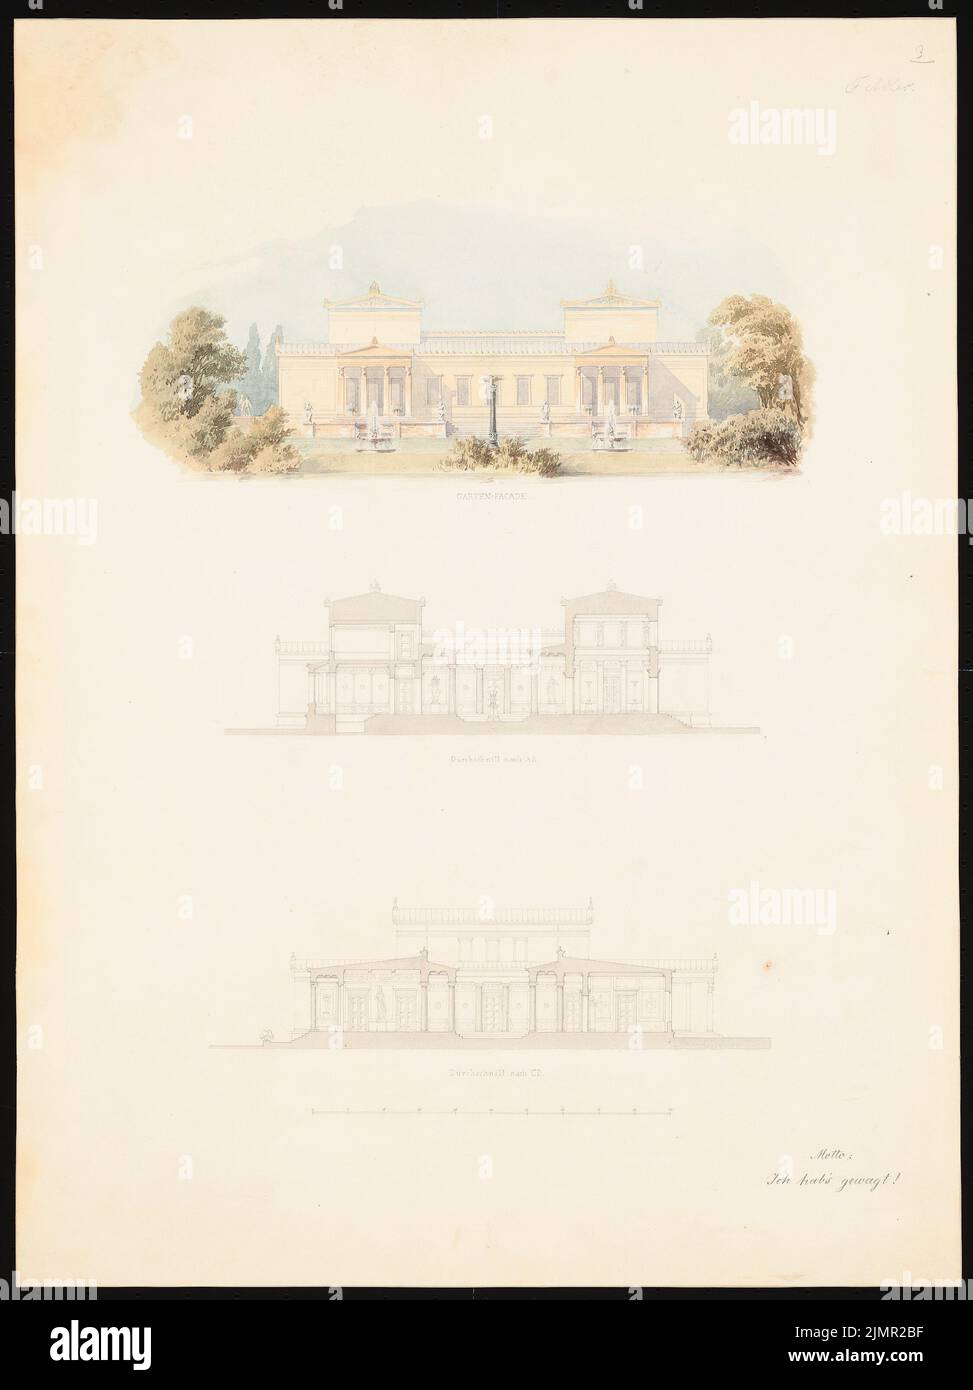 Adler Friedrich (1827-1908), apartment of an architect. Schinkel competition 1852 (1852): Riss garden view (south side), longitudinal section, cross -section; Scale bar. Tusche watercolor on the box, 63.2 x 47.3 cm (including scan edges) Adler Friedrich  (1827-1908): Wohnung eines Architekten. Schinkelwettbewerb 1852 Stock Photo